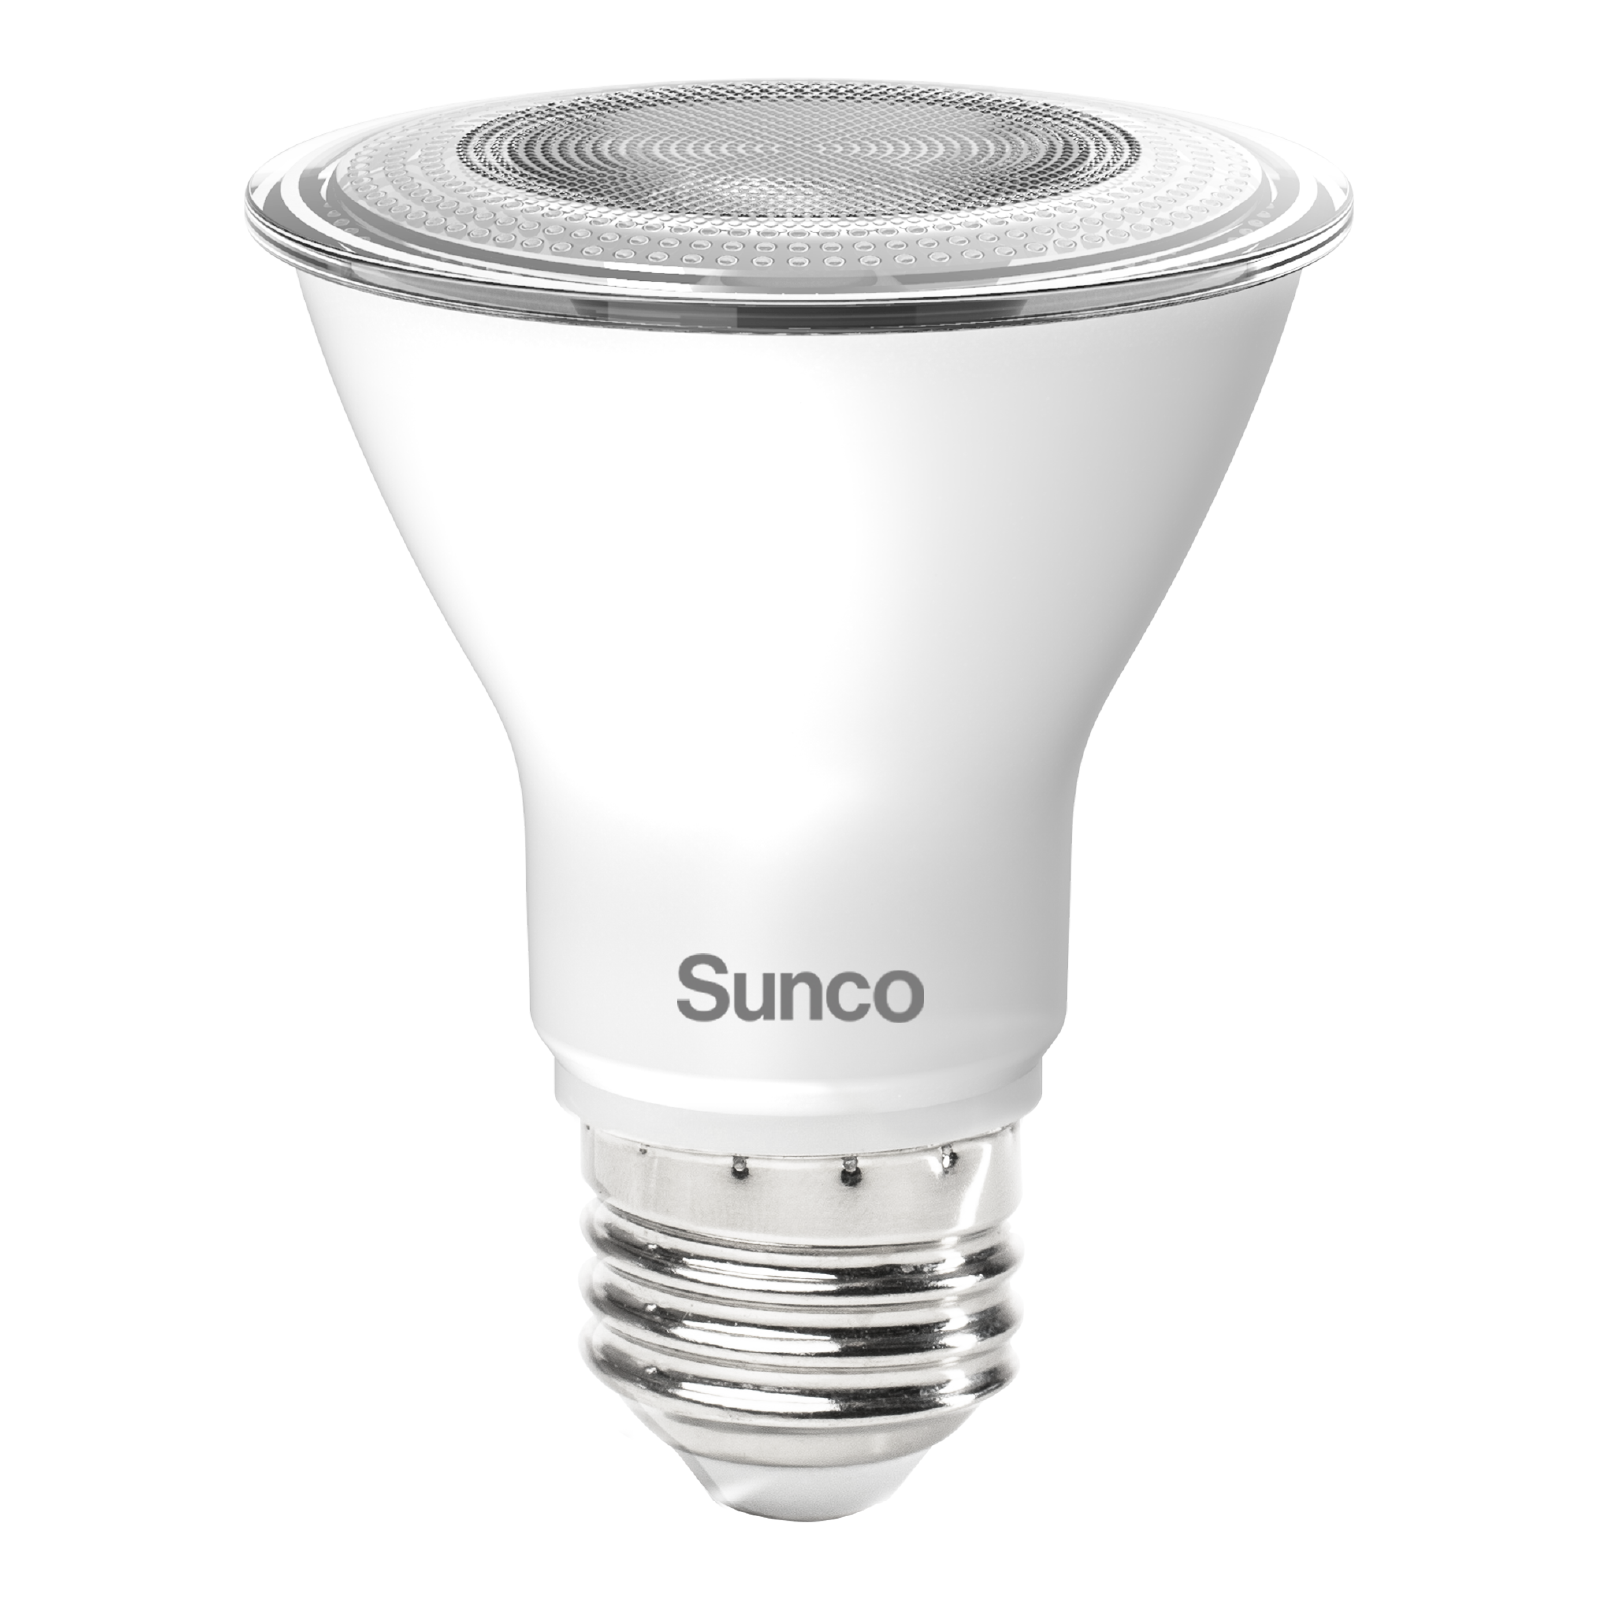 The Sunco Lighting PAR20 LED Bulb with its E26 base is waterproof for outdoor lighting applications. The dimmable bulb works great for spotlighting trees, signs, or sculptures in your landscaping, along with highlighting architectural details. This 7W bulb is a 50W equivalent to help reduce your electric bills when compared to a traditional light bulb. Inside you can use it for highlighting paintings, artwork, or architectural details as a track lighting or recessed lighting solution.